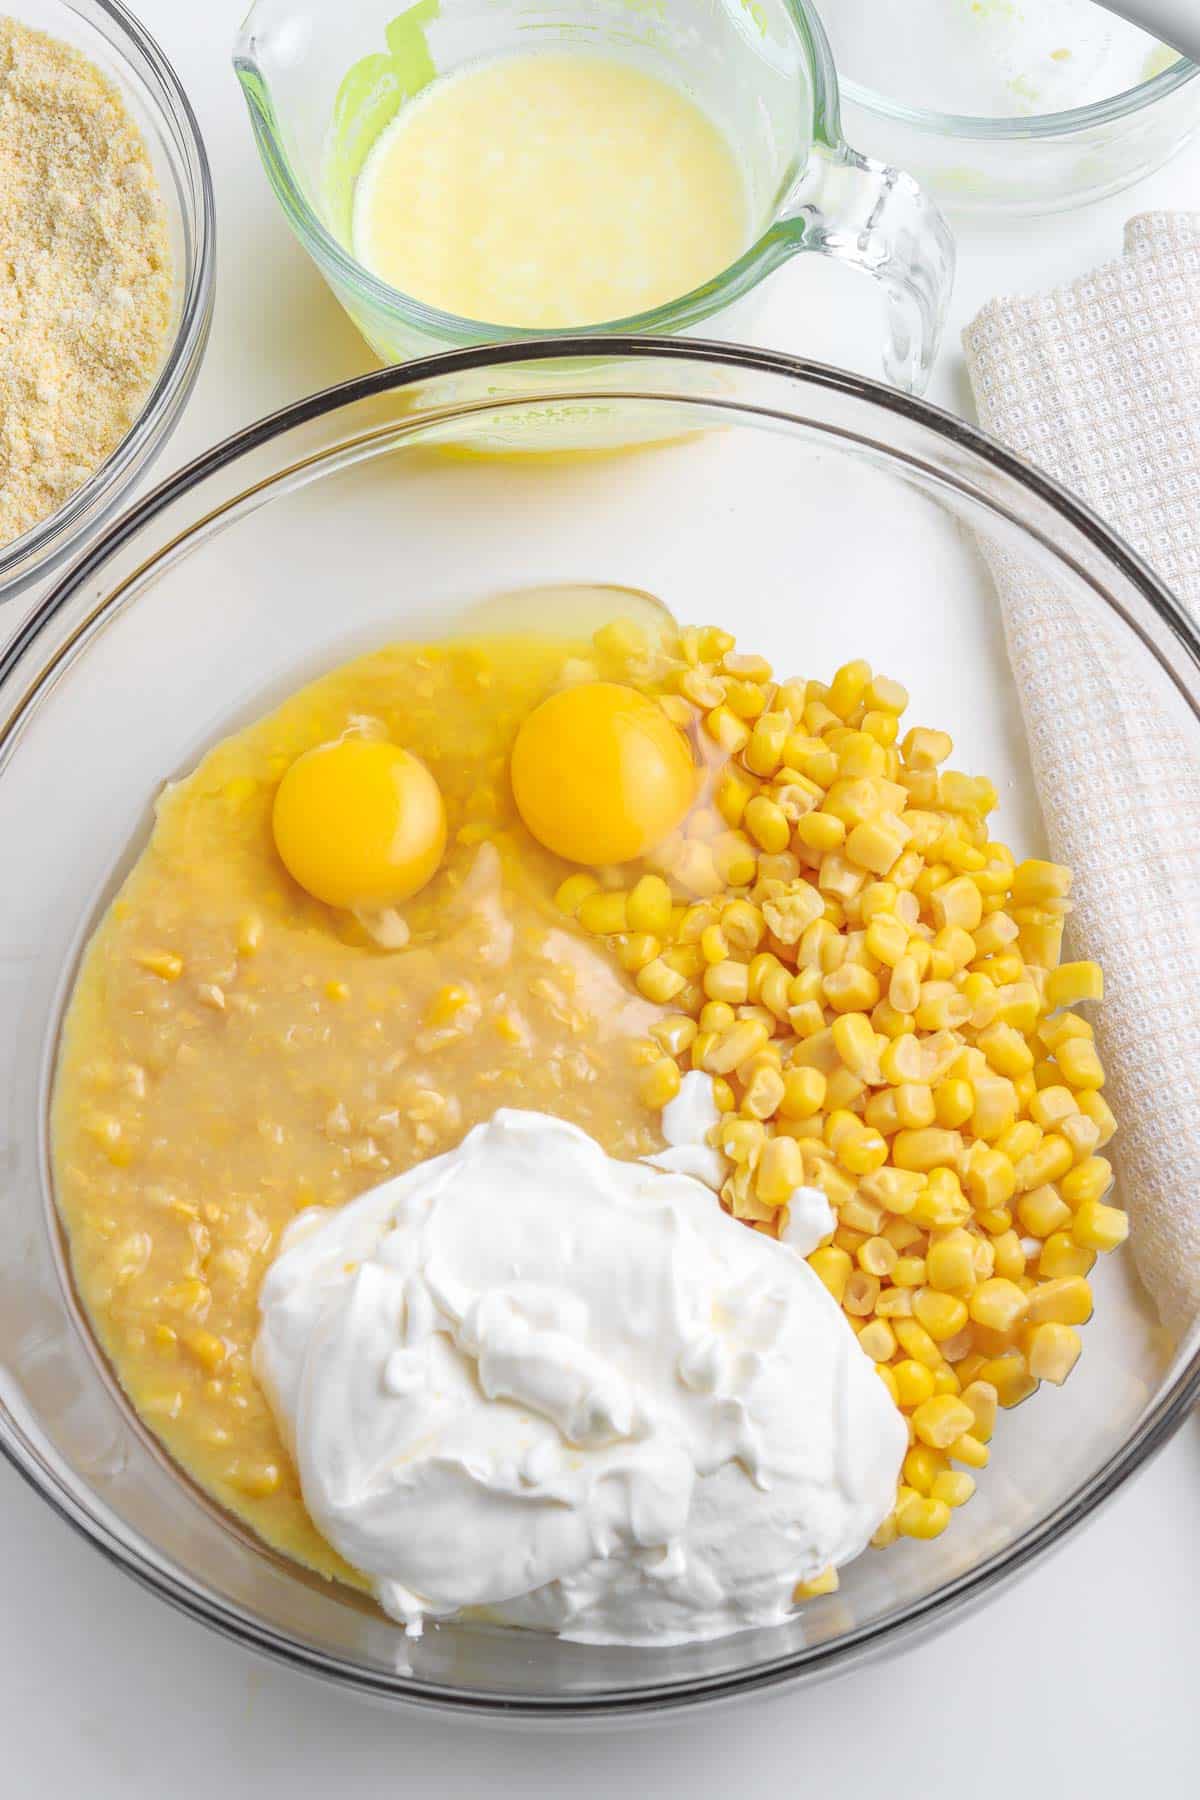 Glass mixing bowl of eggs, corn, creamed corn and sour cream.